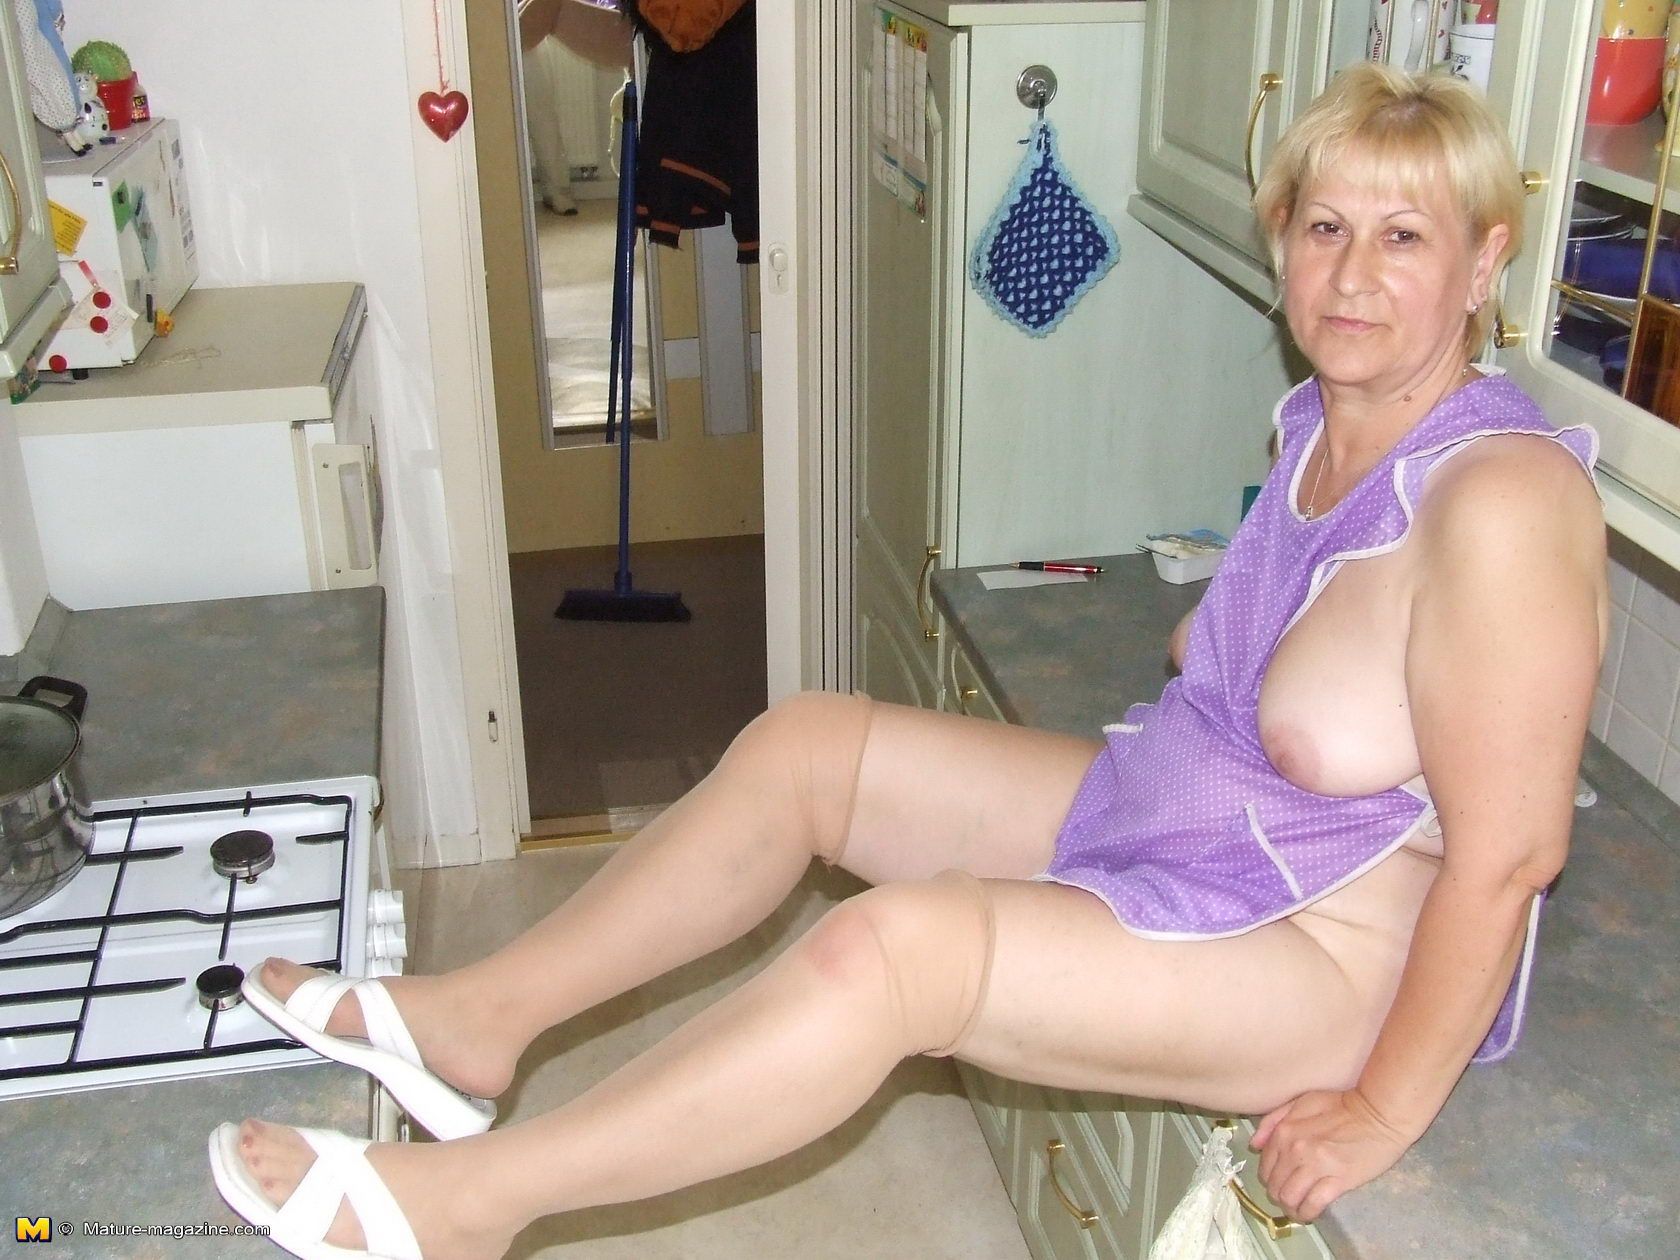 Real amateur mature housewifes nide pics image